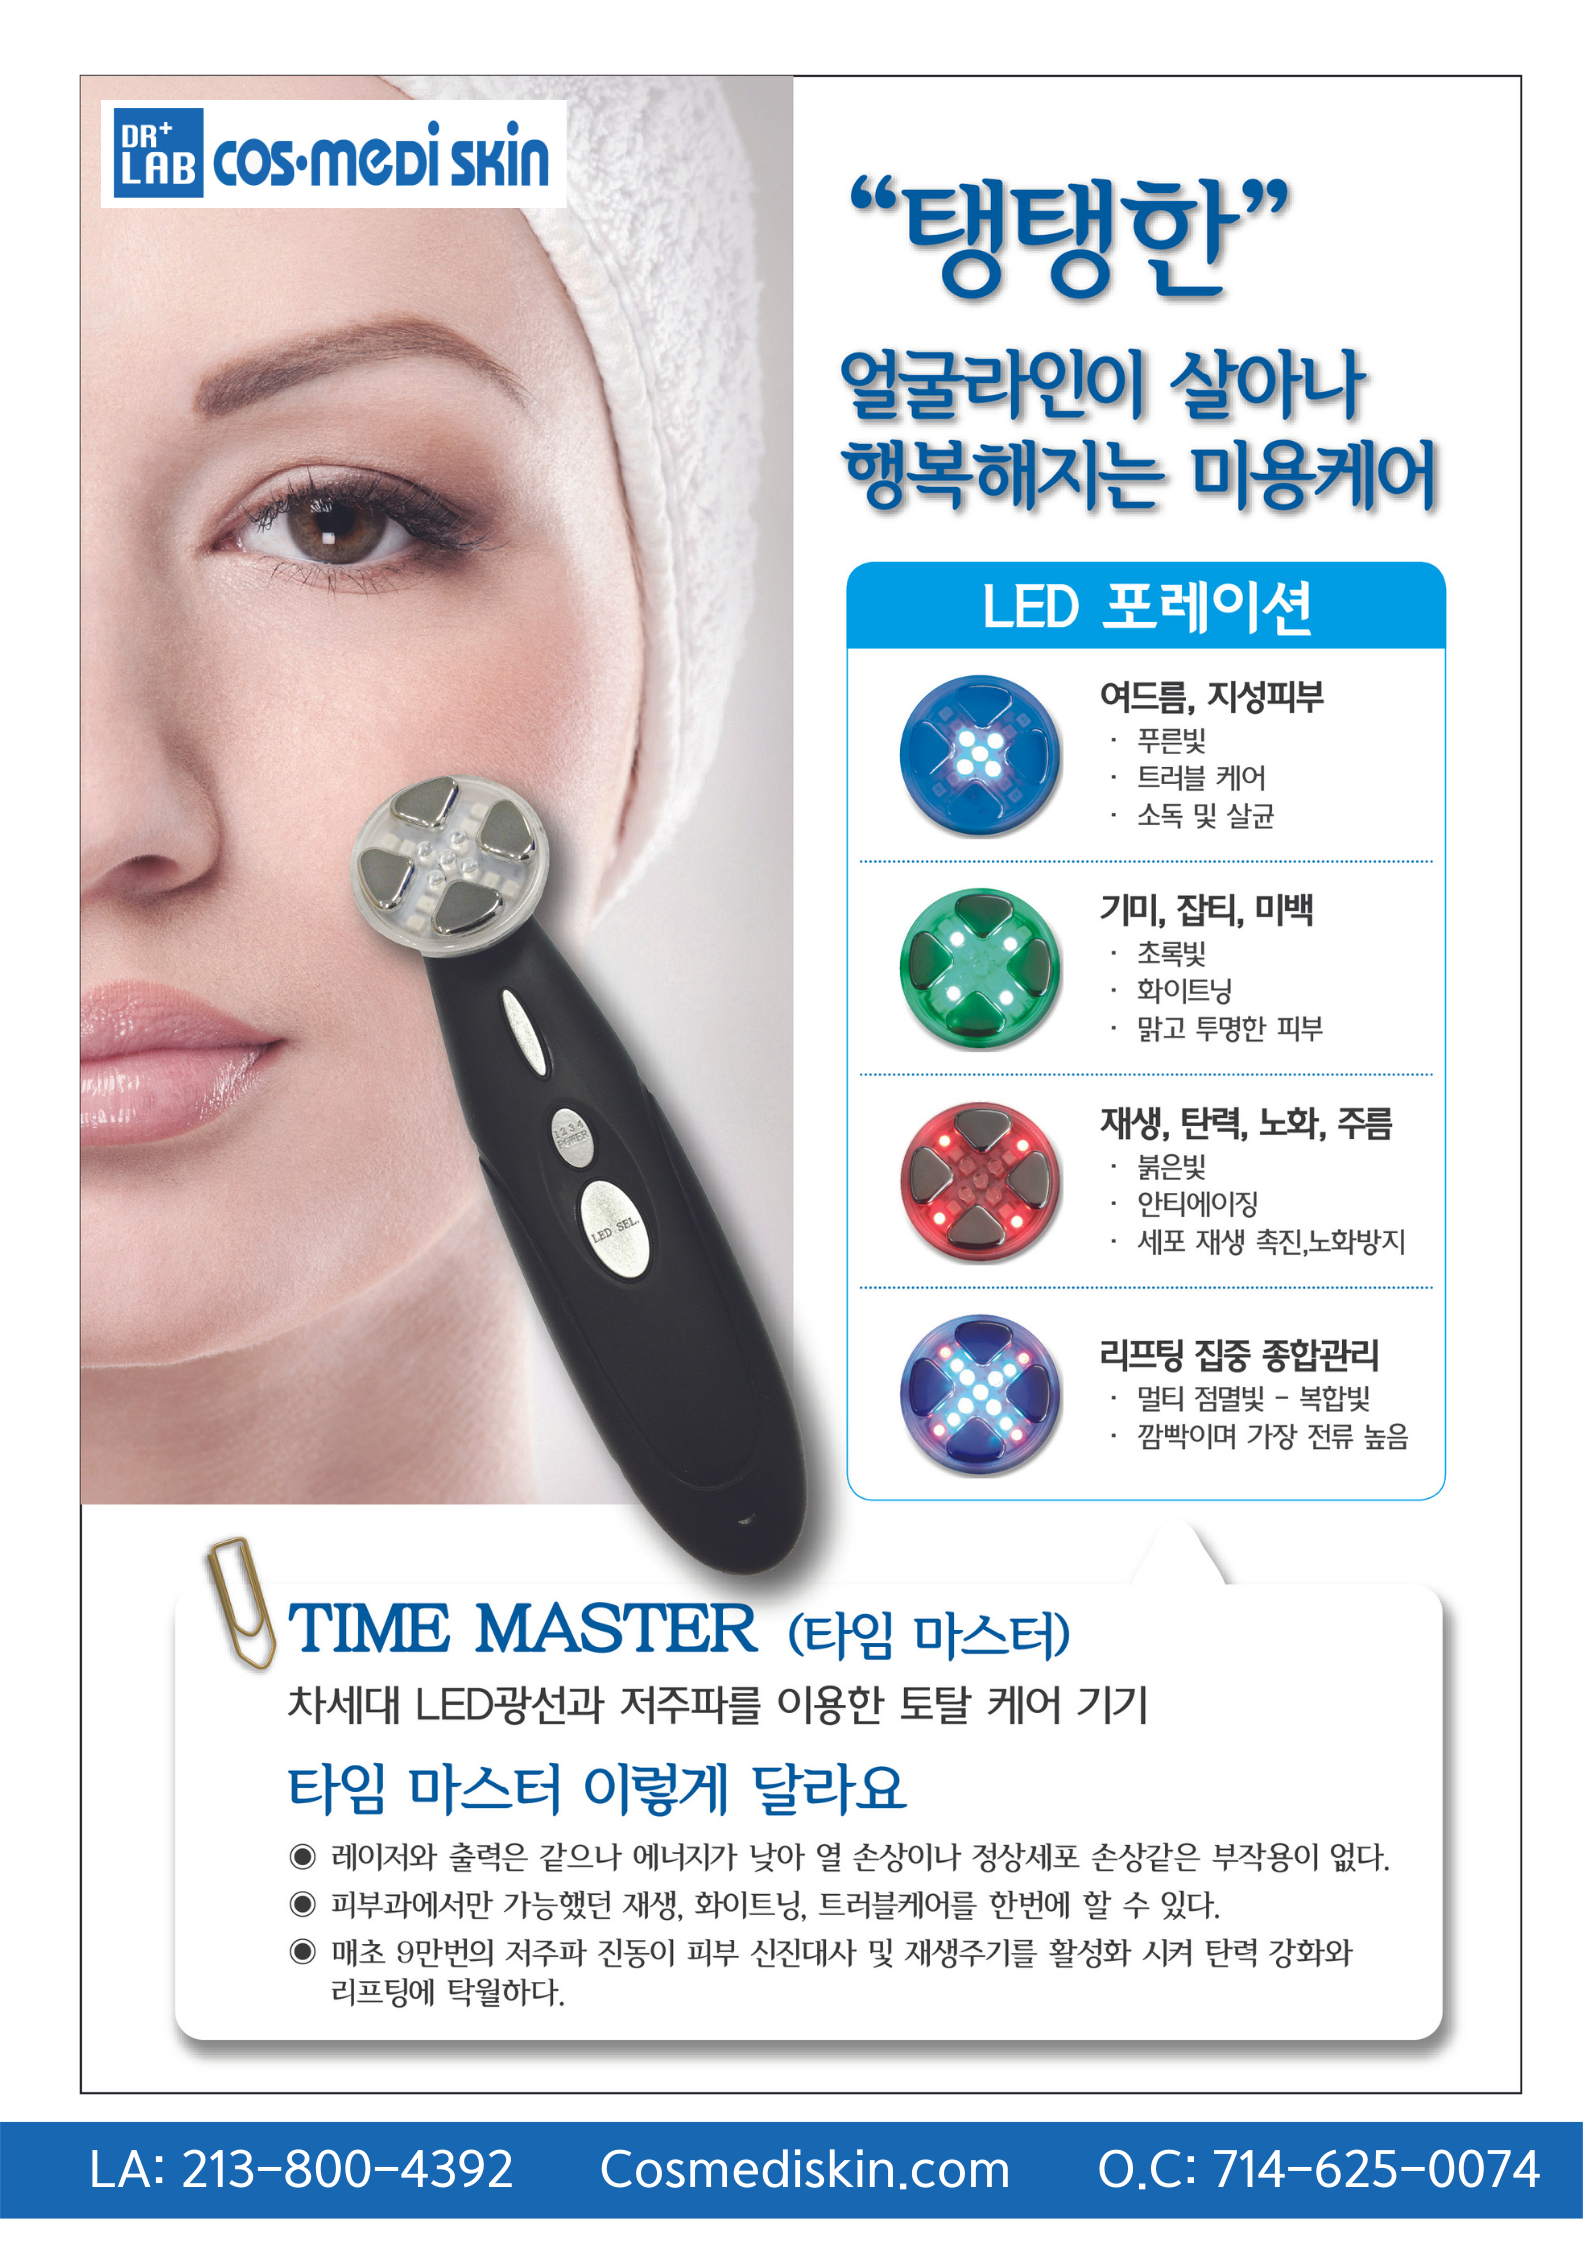 TIME MASTER DEVICE FOR HOME CARE USE